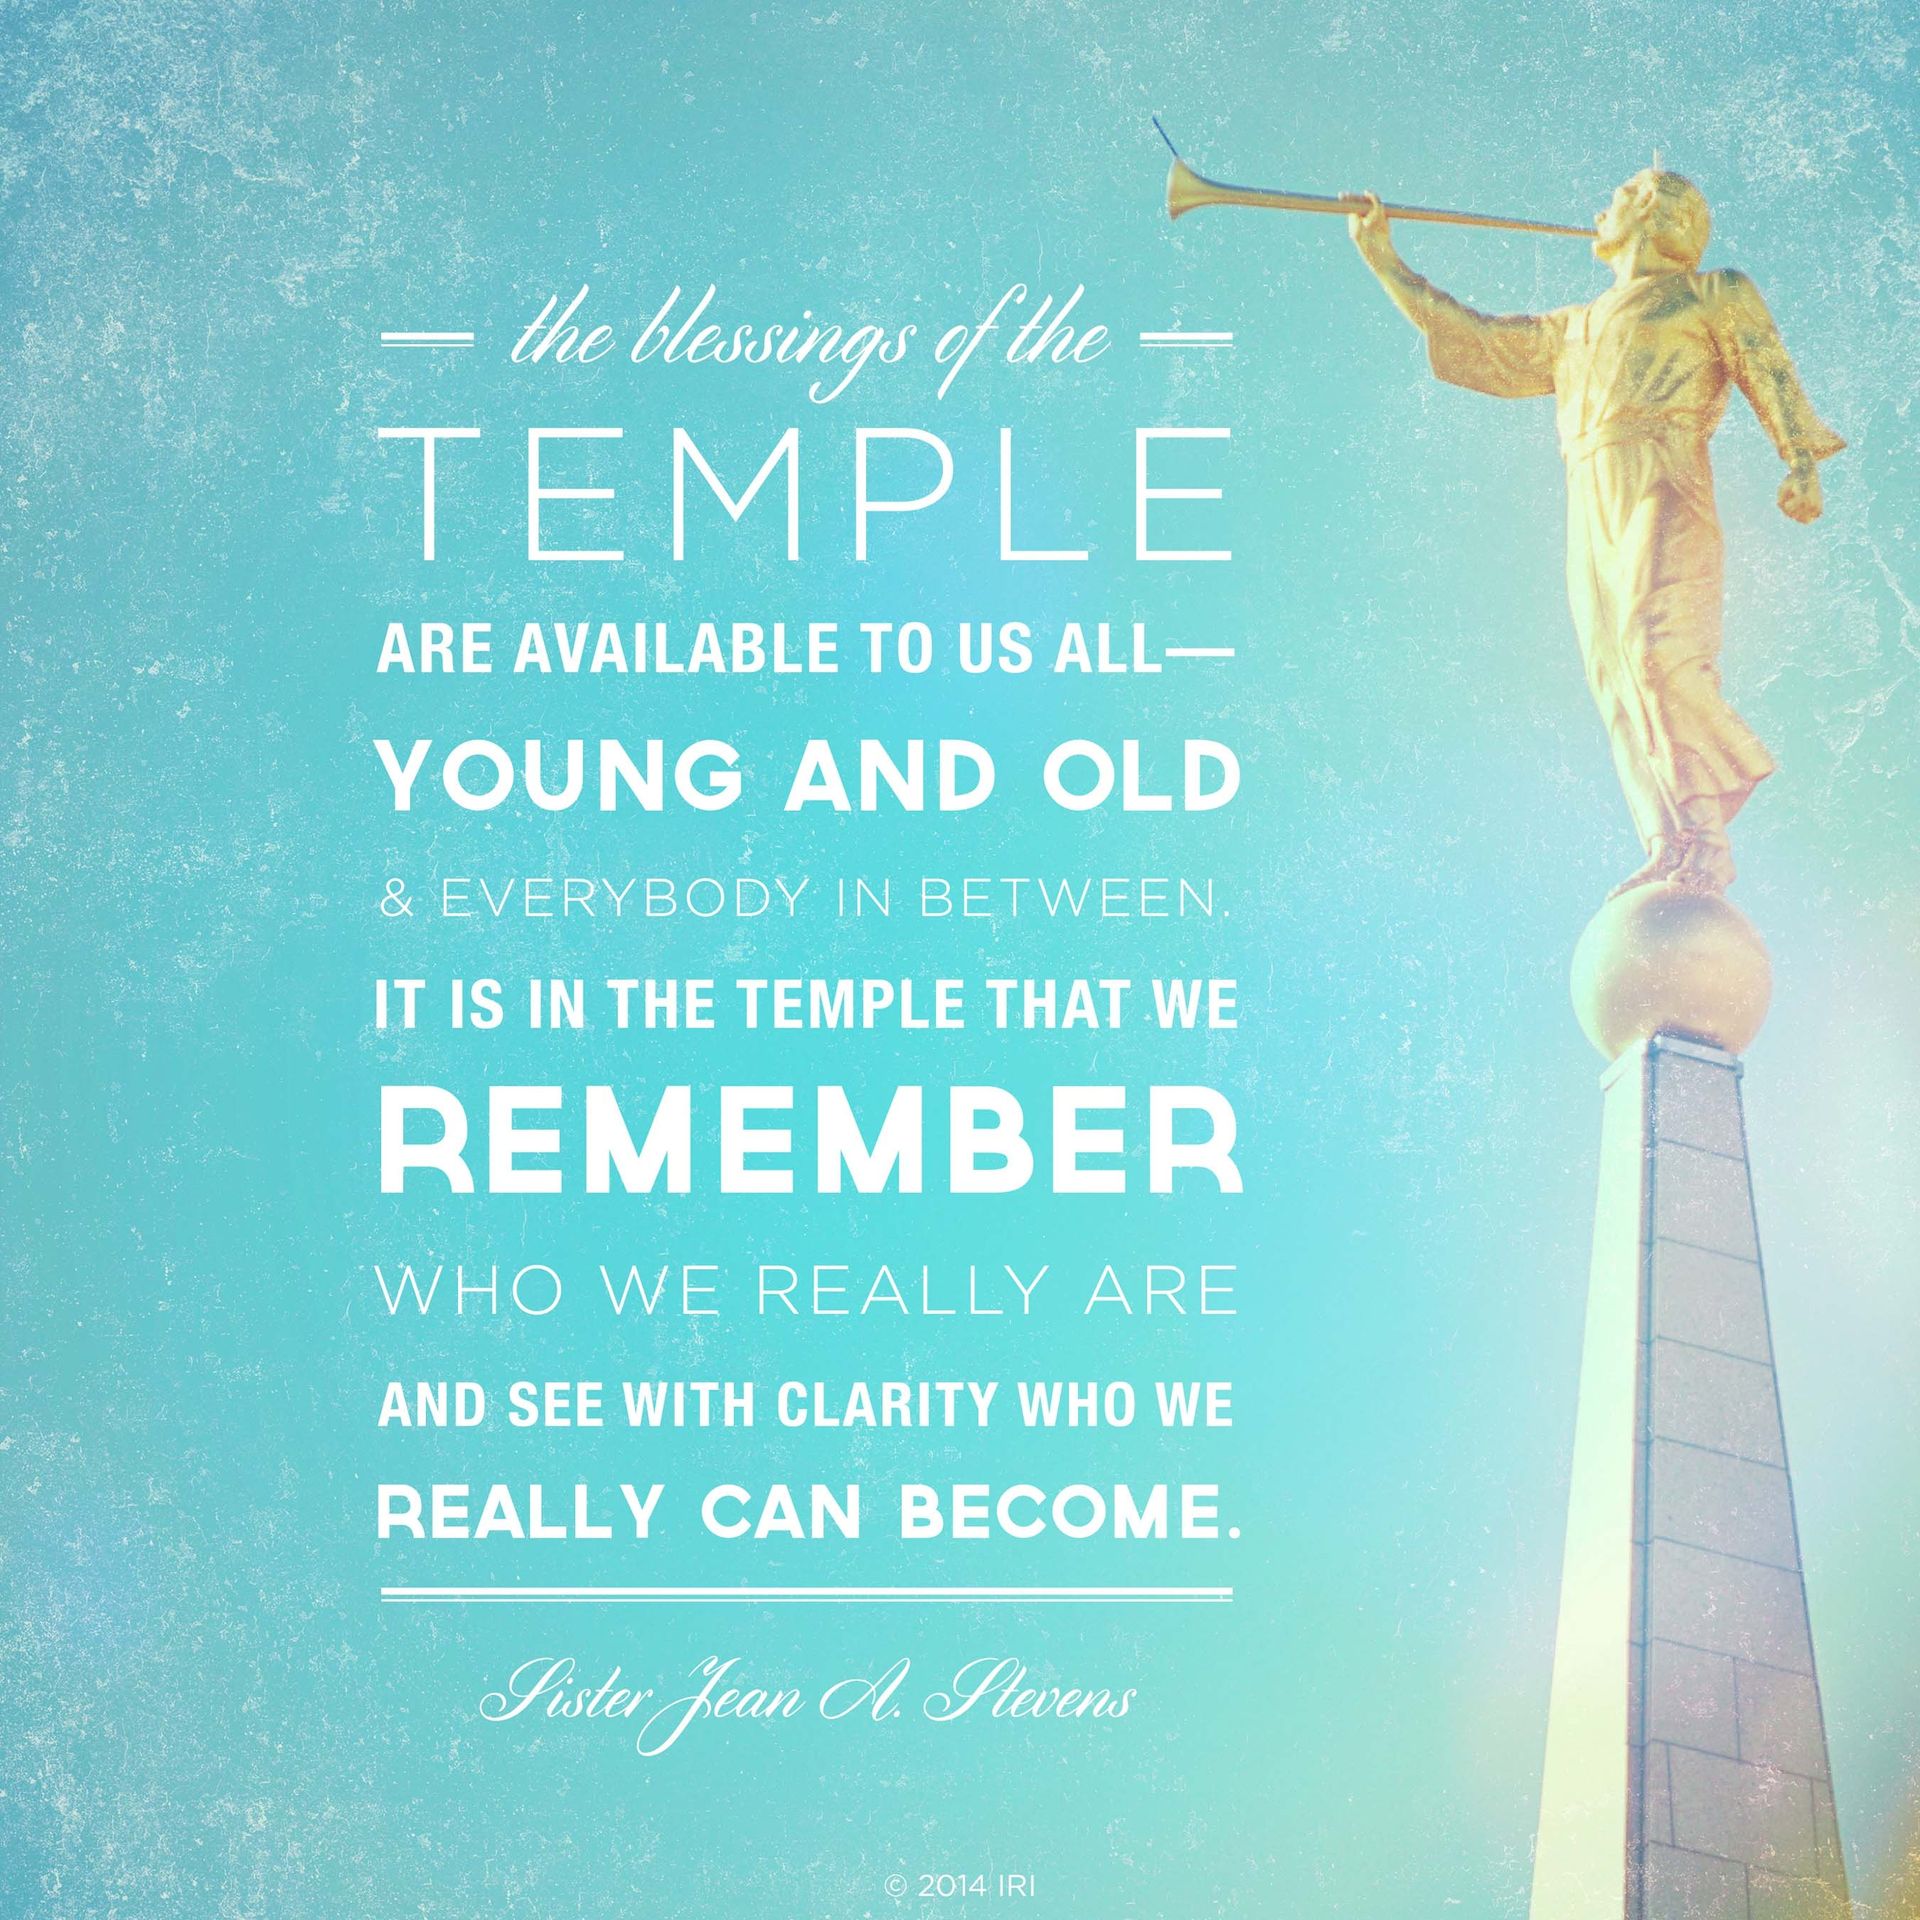 “The blessings of the temple are available to us all—young and old and everybody in between. It is in the temple that we remember who we really are and see with clarity who we really can become.”—Sister Jean A. Stevens, “Primary Leaders Encourage Families to Focus on the Savior”